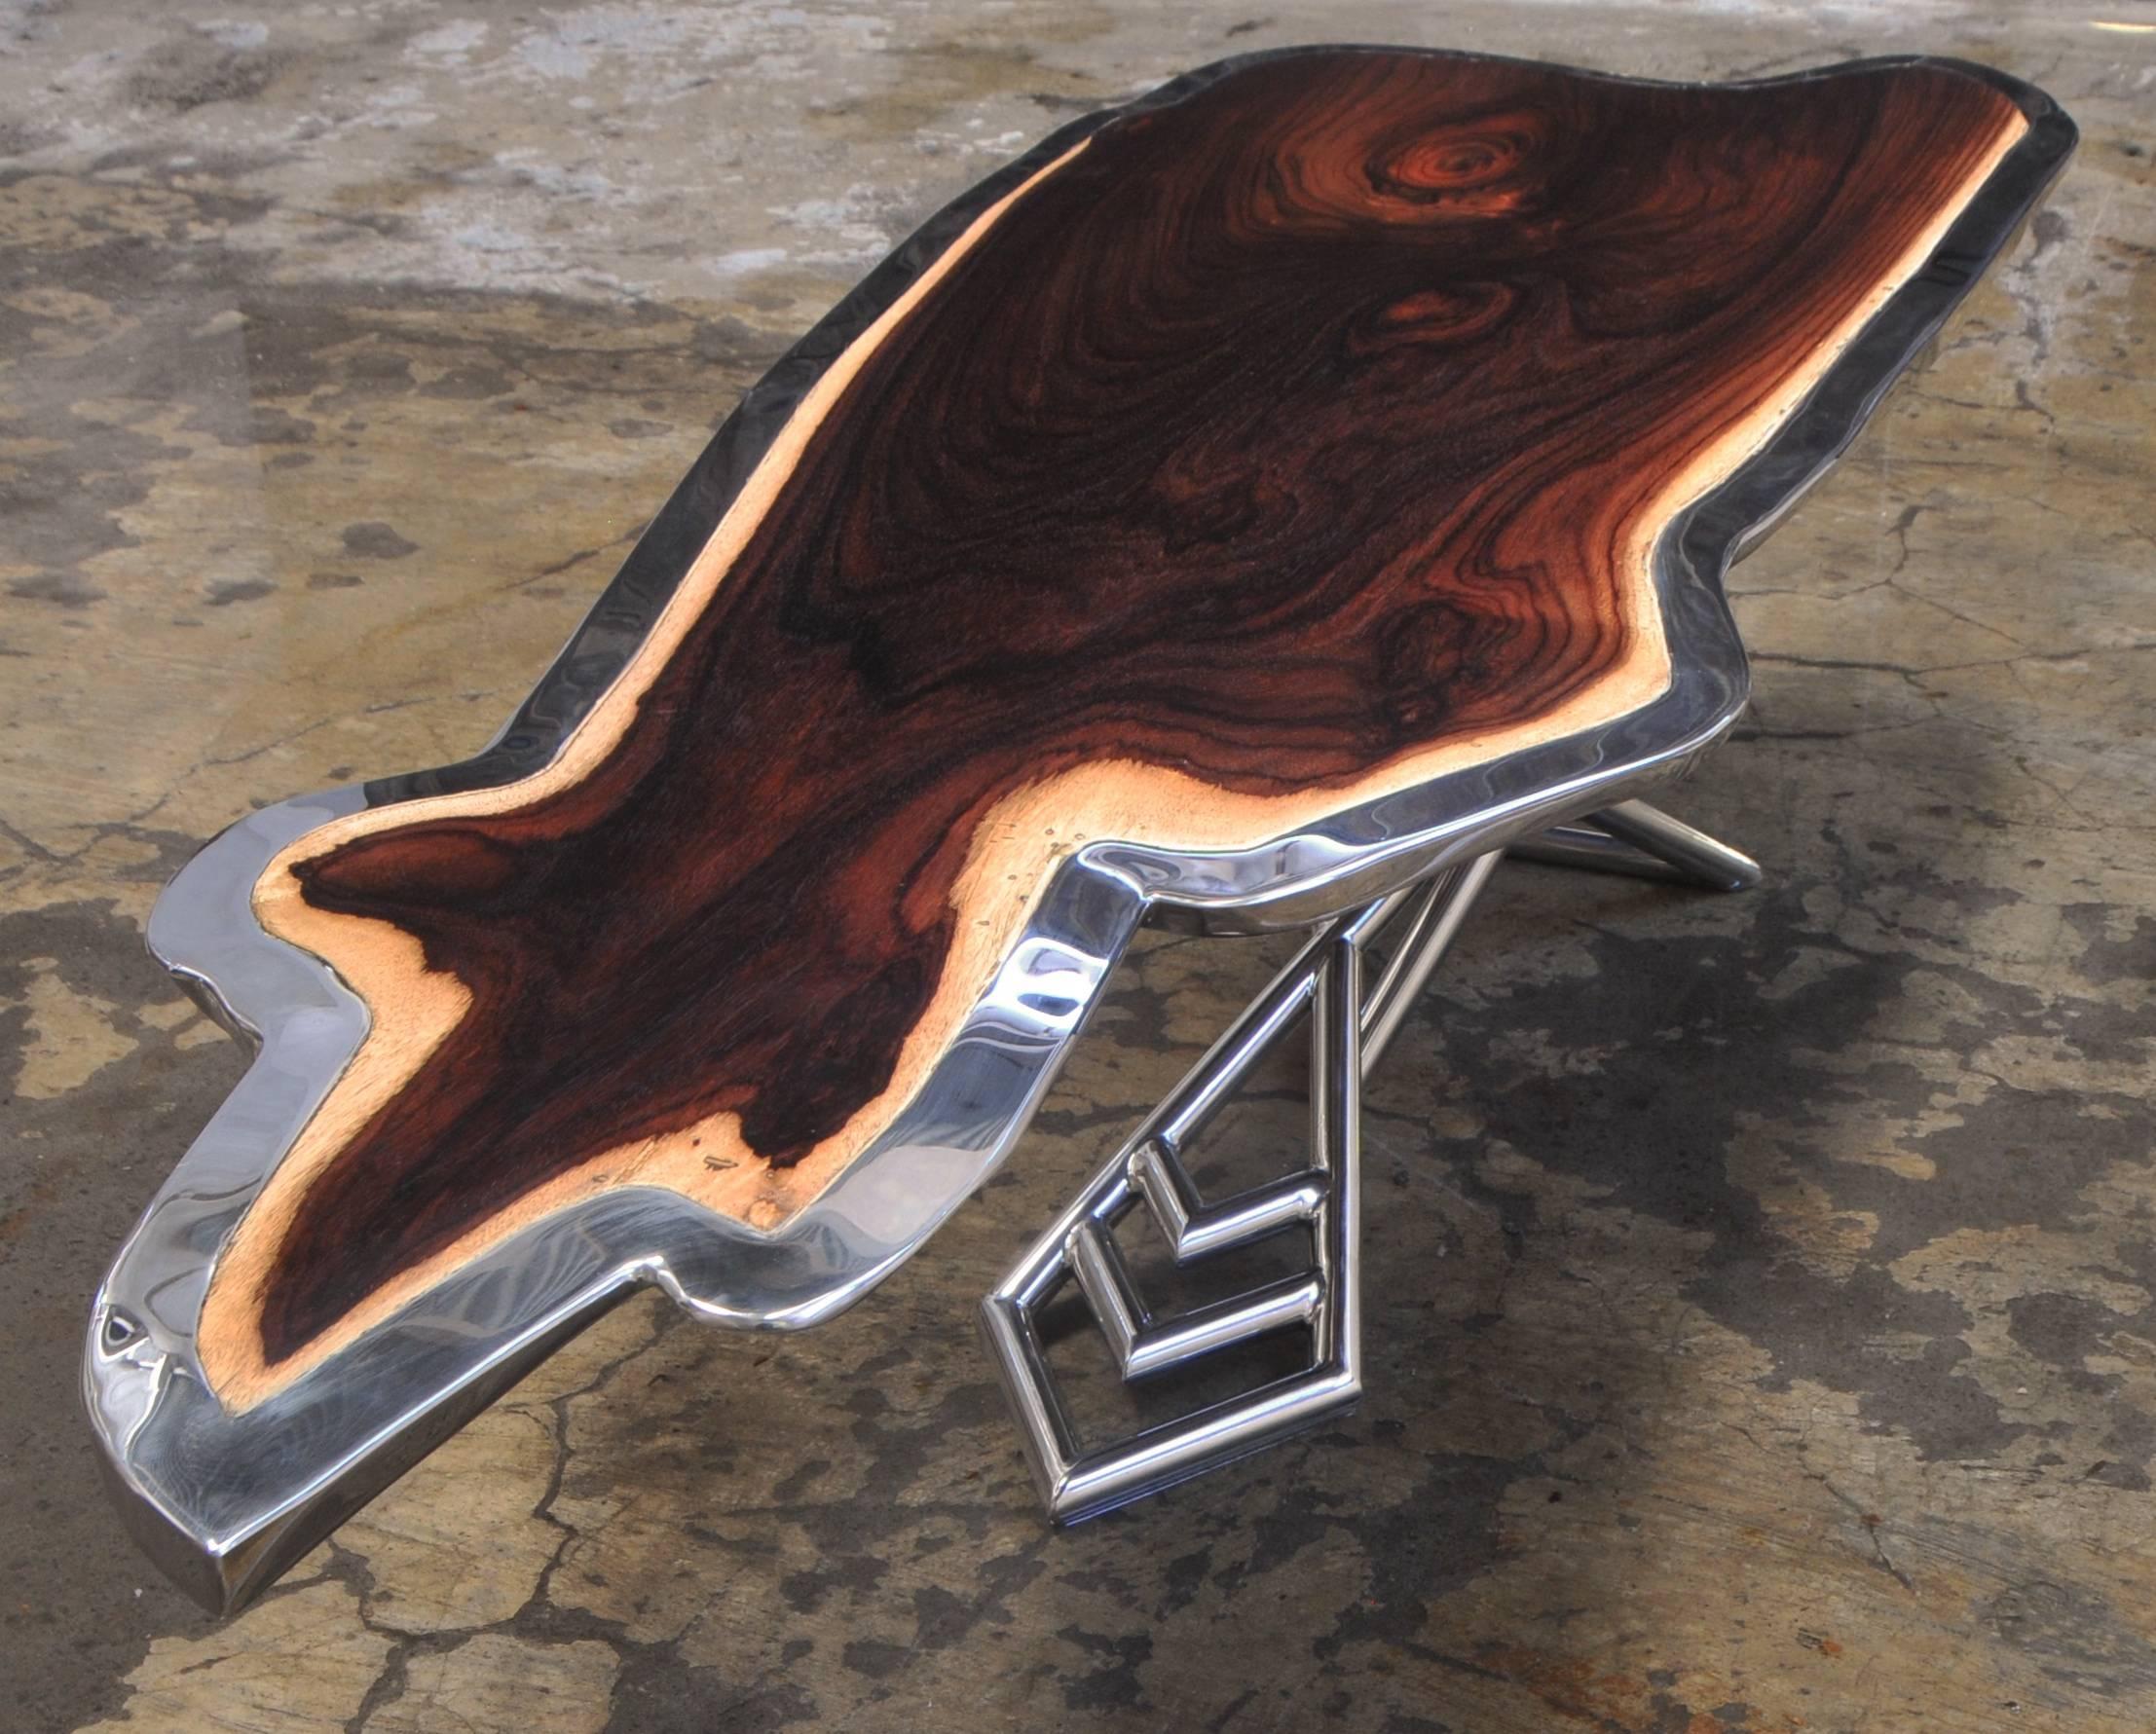 Balinese Kangaroo Coffee Table Made of Rosewood and Mirror Polished Stainless Steel